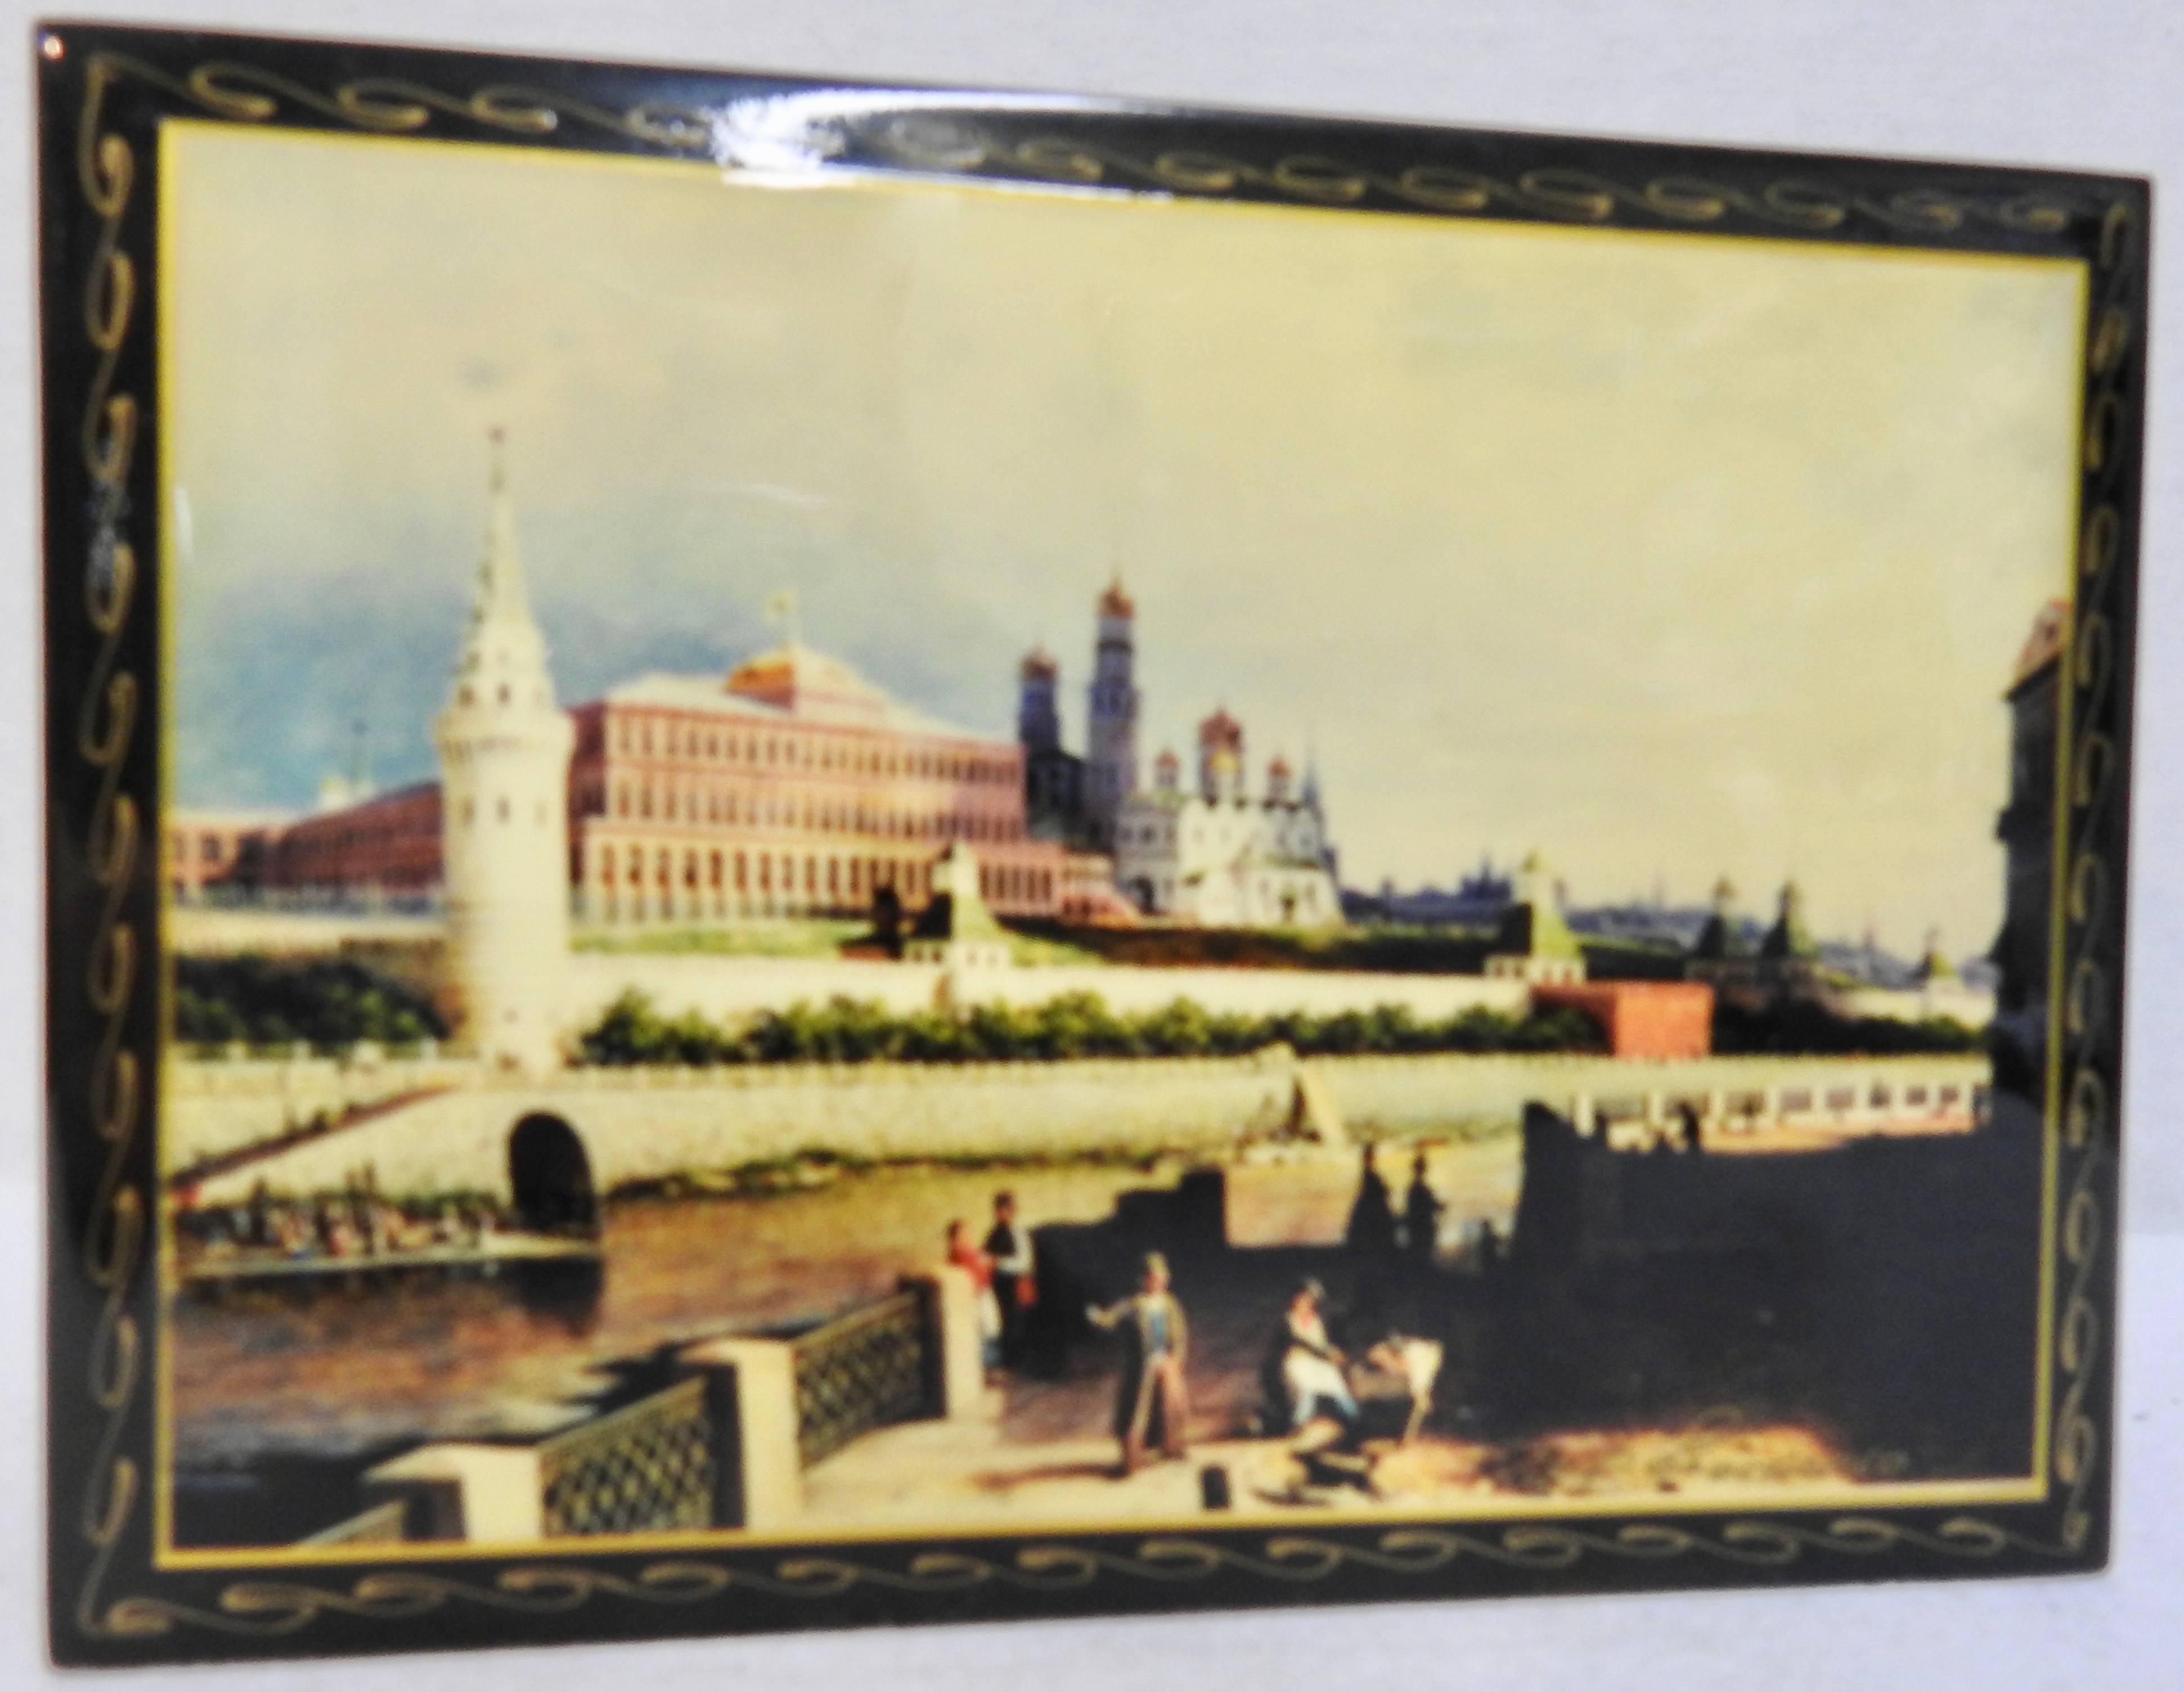 The Kremlin including the buildings with onion domes, are in the background of the waterfront scene on this Russian black lacquer box. People are enjoying the peacefulness of the water. Waves of gold surround the edges of the box. It opens to a